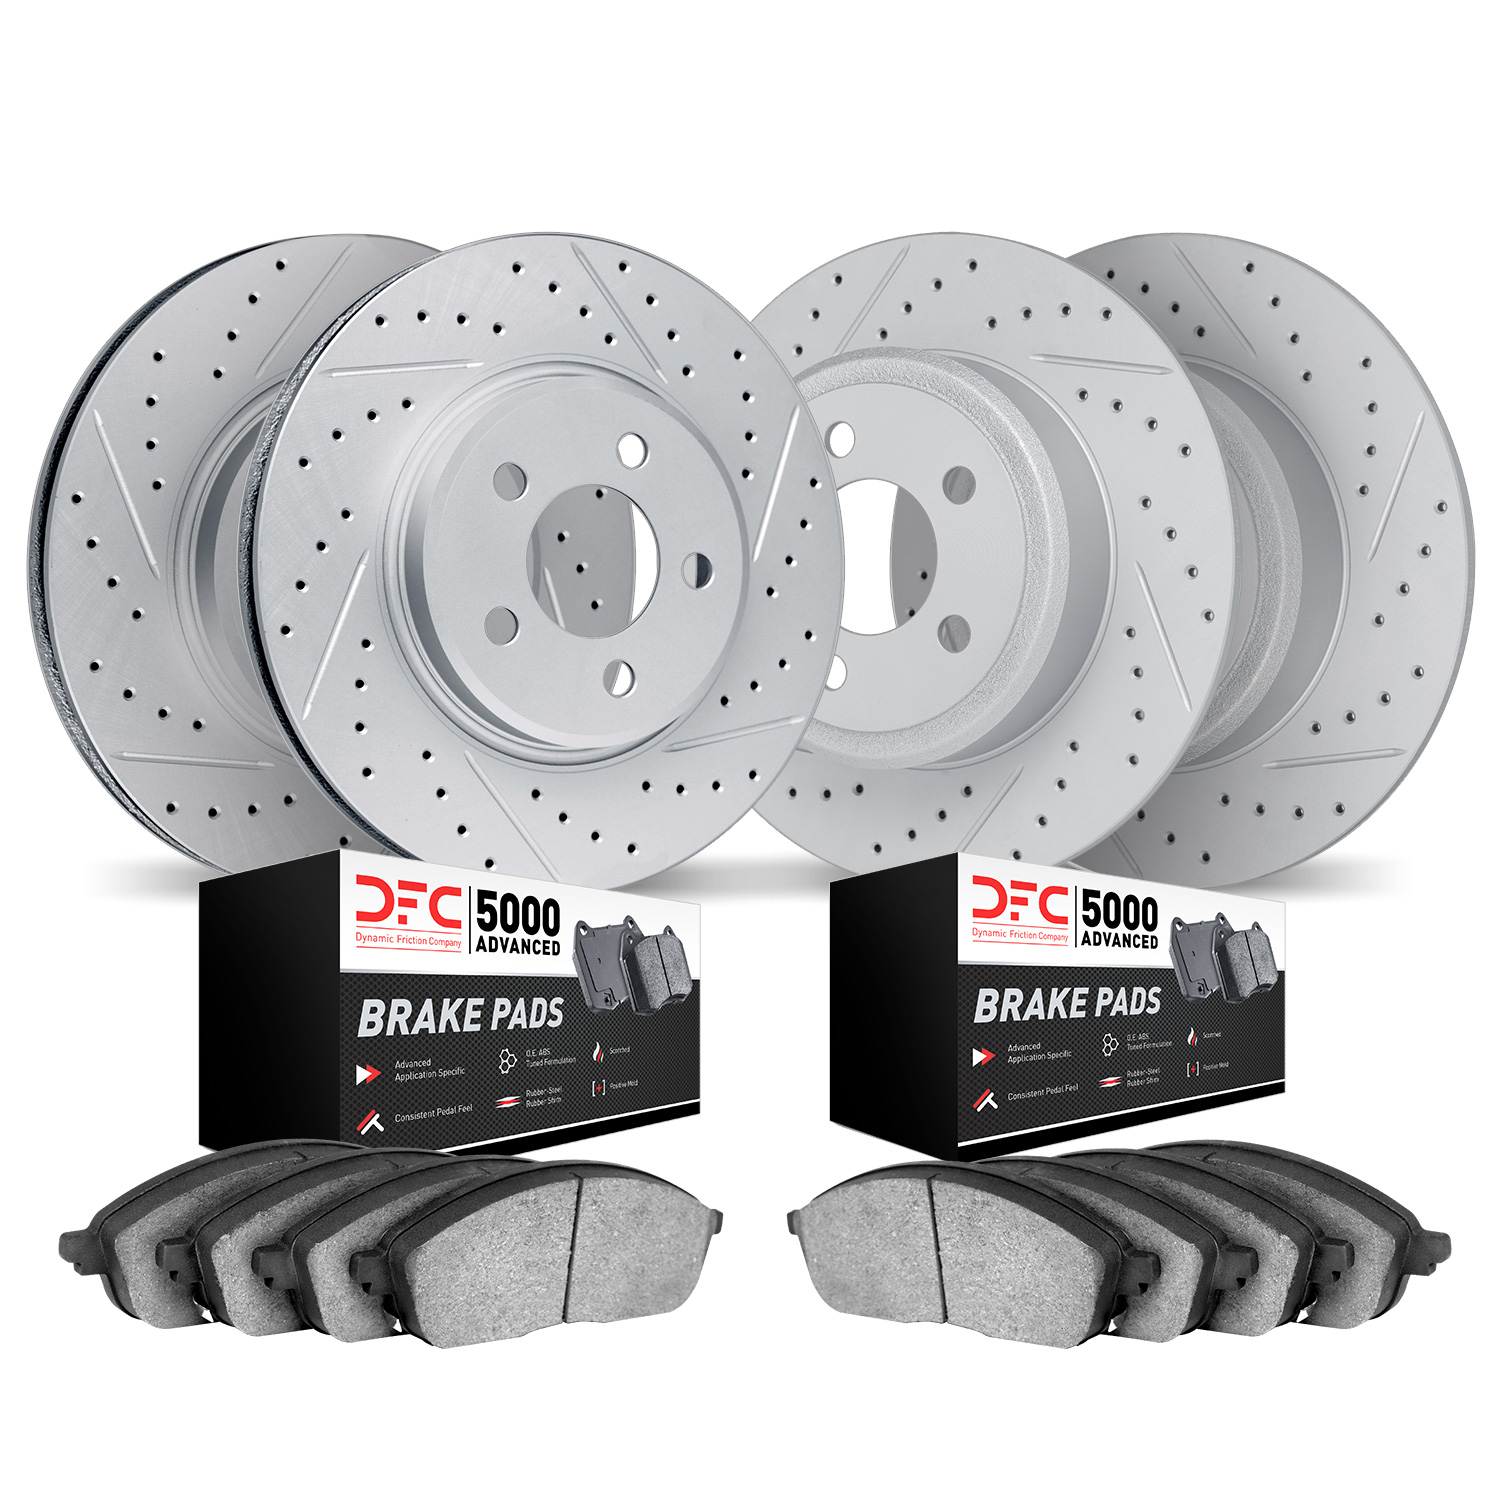 2504-54272 Geoperformance Drilled/Slotted Rotors w/5000 Advanced Brake Pads Kit, 2005-2007 Ford/Lincoln/Mercury/Mazda, Position: